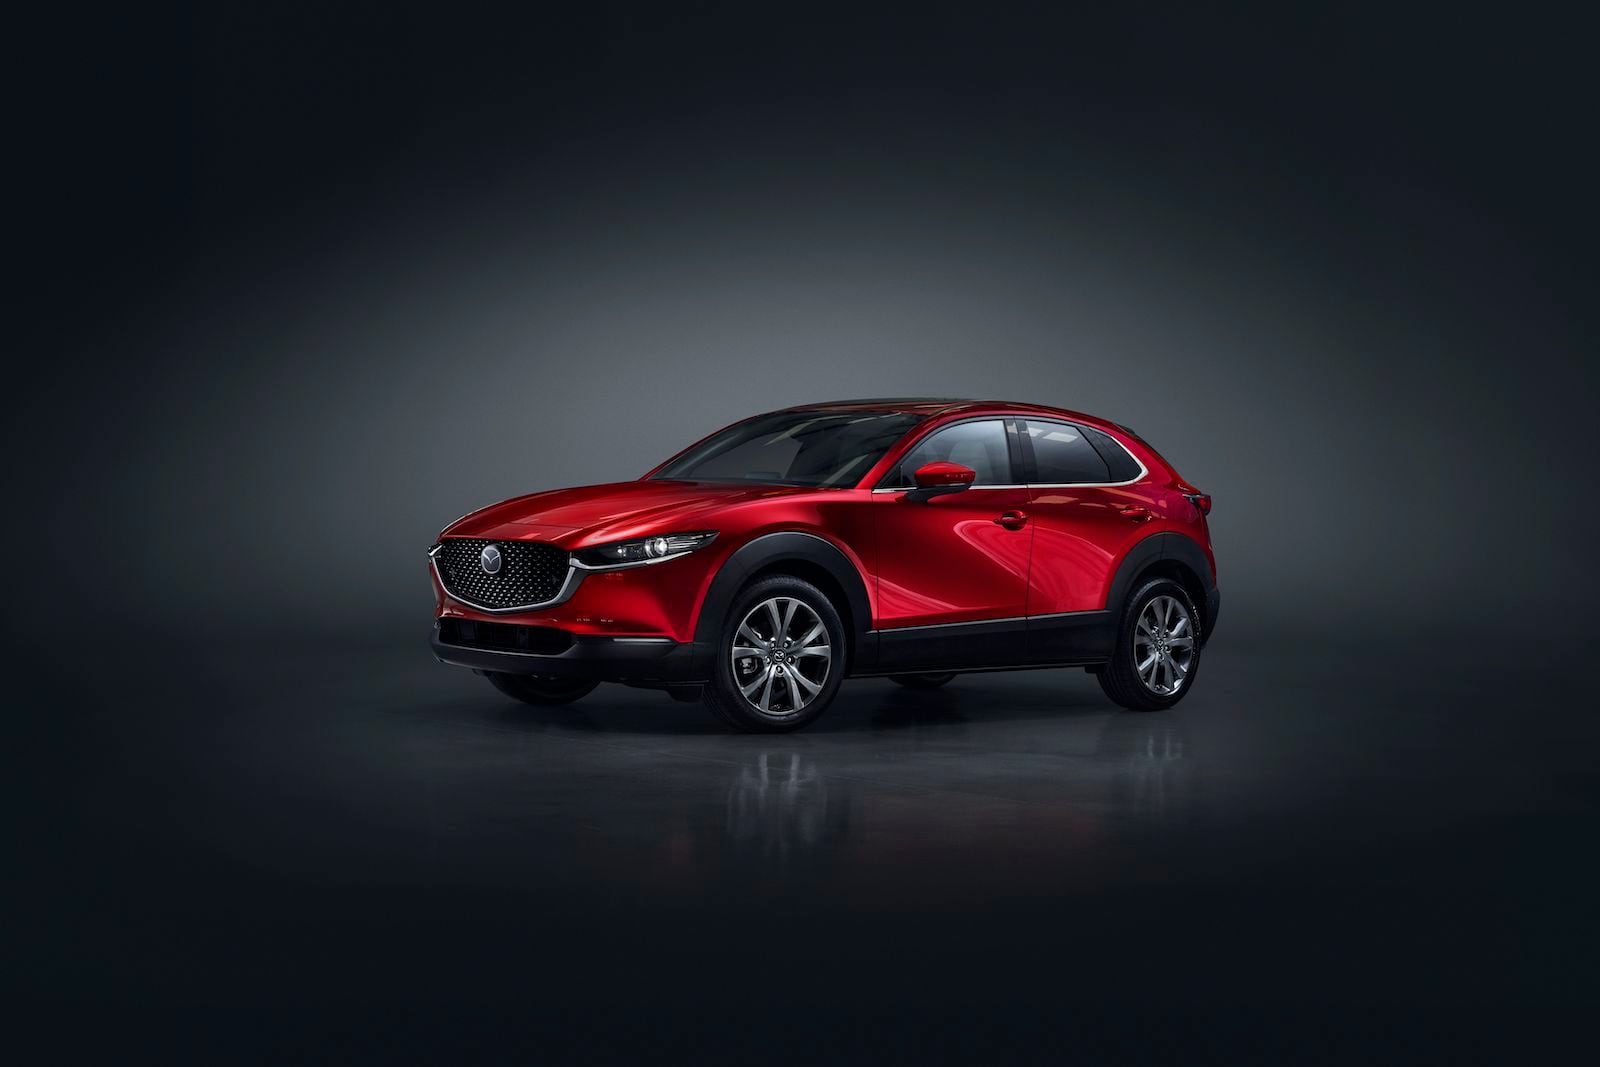 Mazda's CX-30 SUV – the right package size for a small family